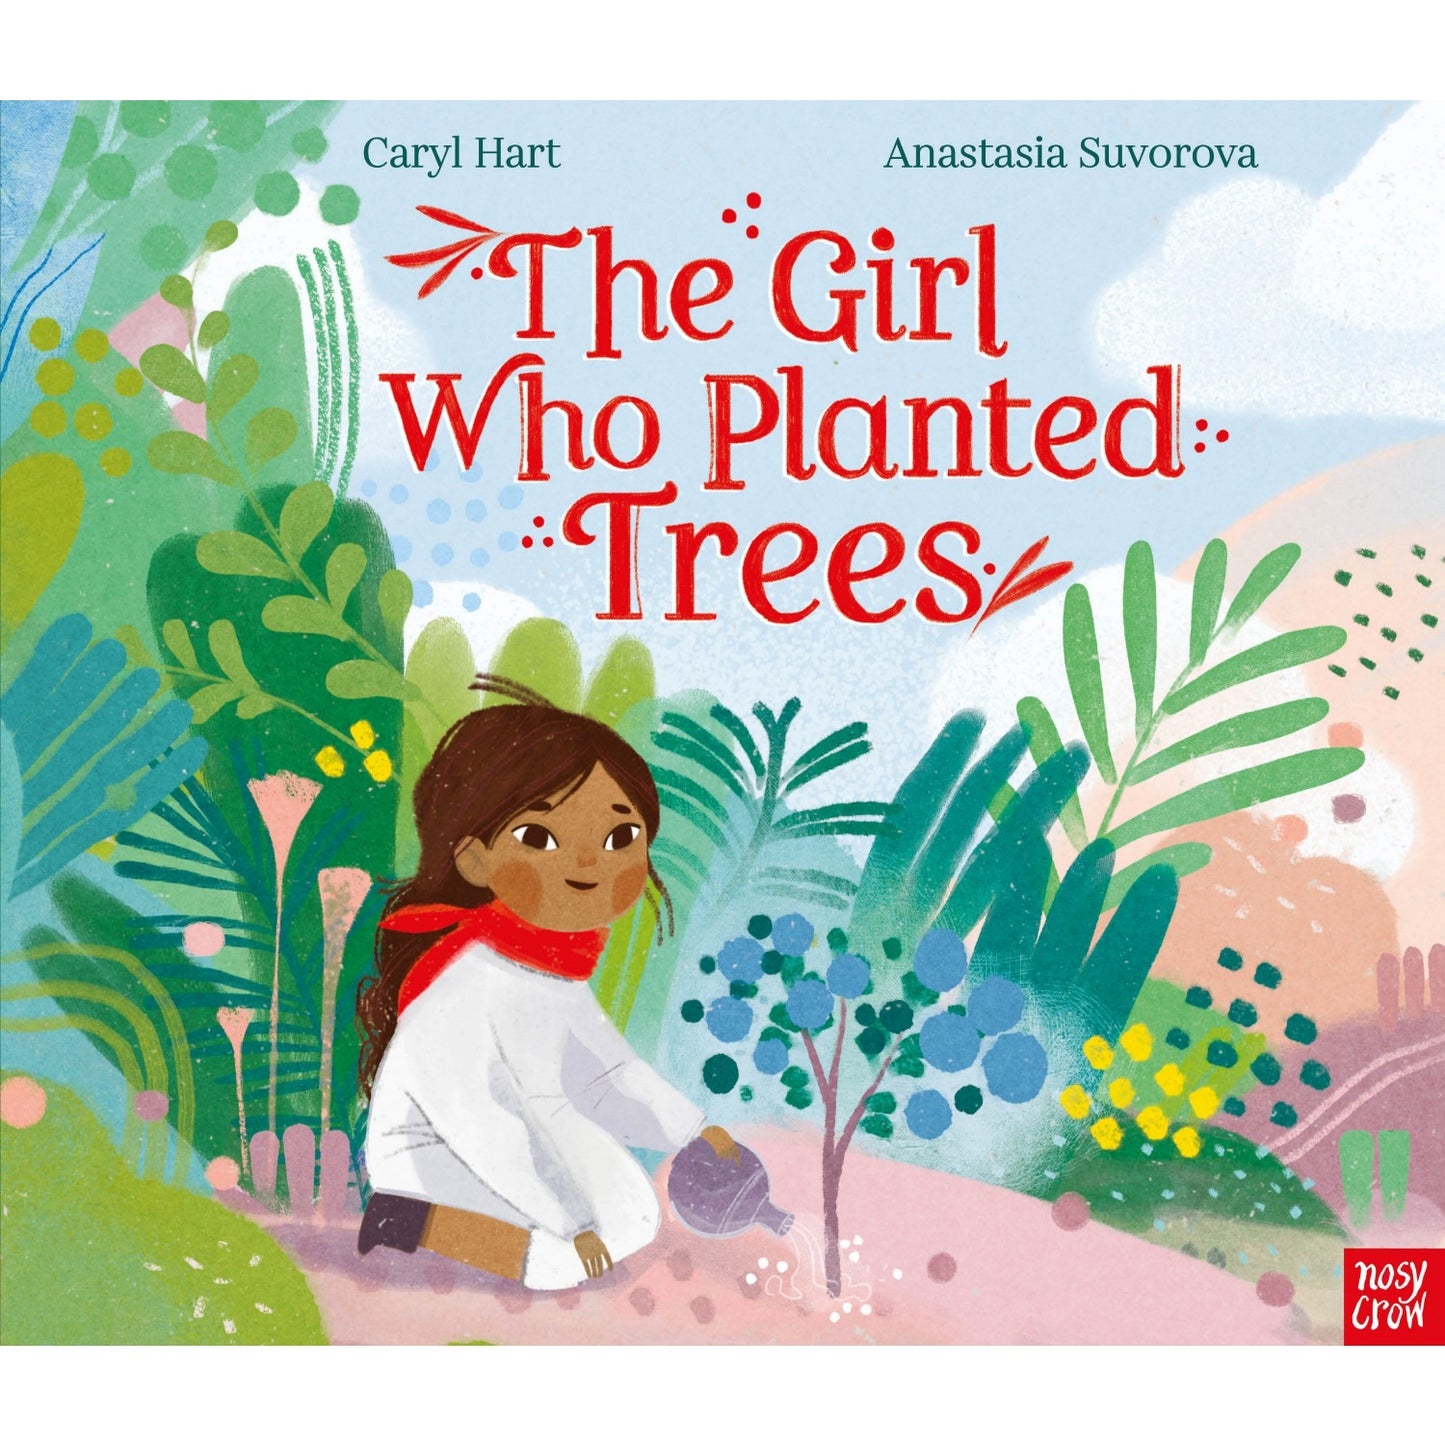 The Girl Who Planted Trees | Hardcover | Children’s Book on Nature